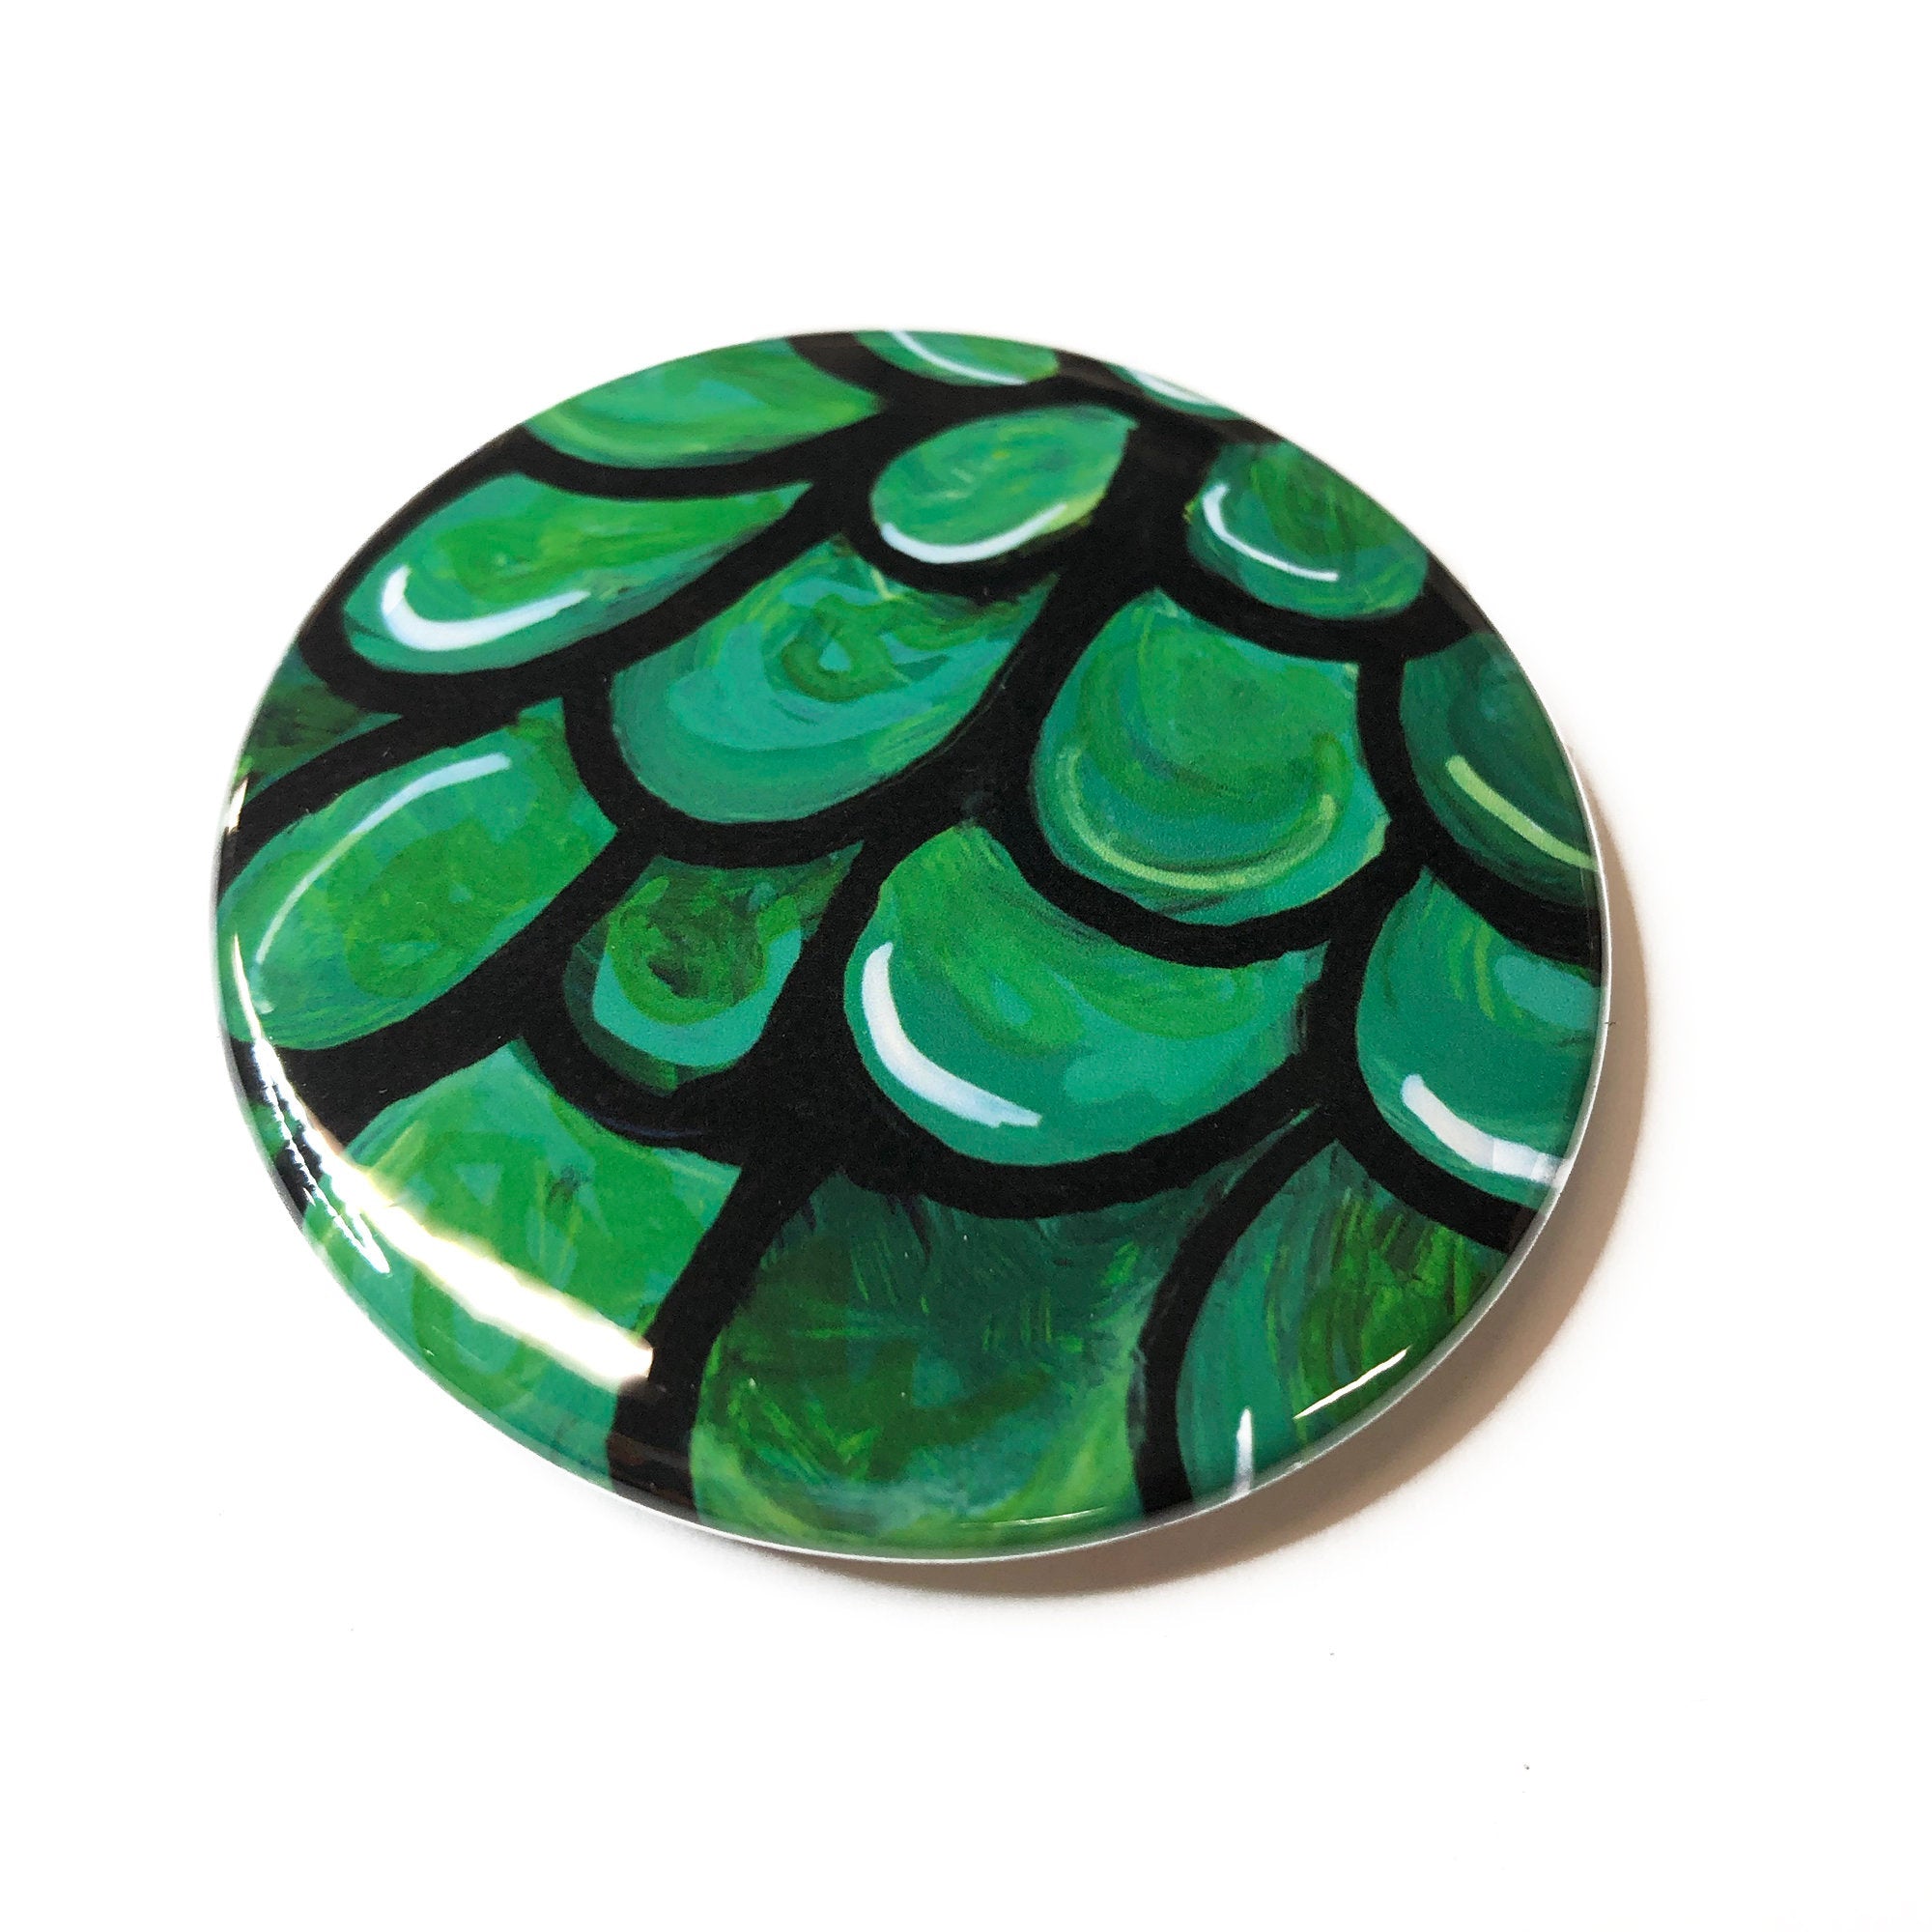 Jade Plant Magnet, Pin Back Button, or Pocket Mirror - Succulent Lover Gift, Party Favor - Fridge Magnet, Pinback, or Purse Mirror